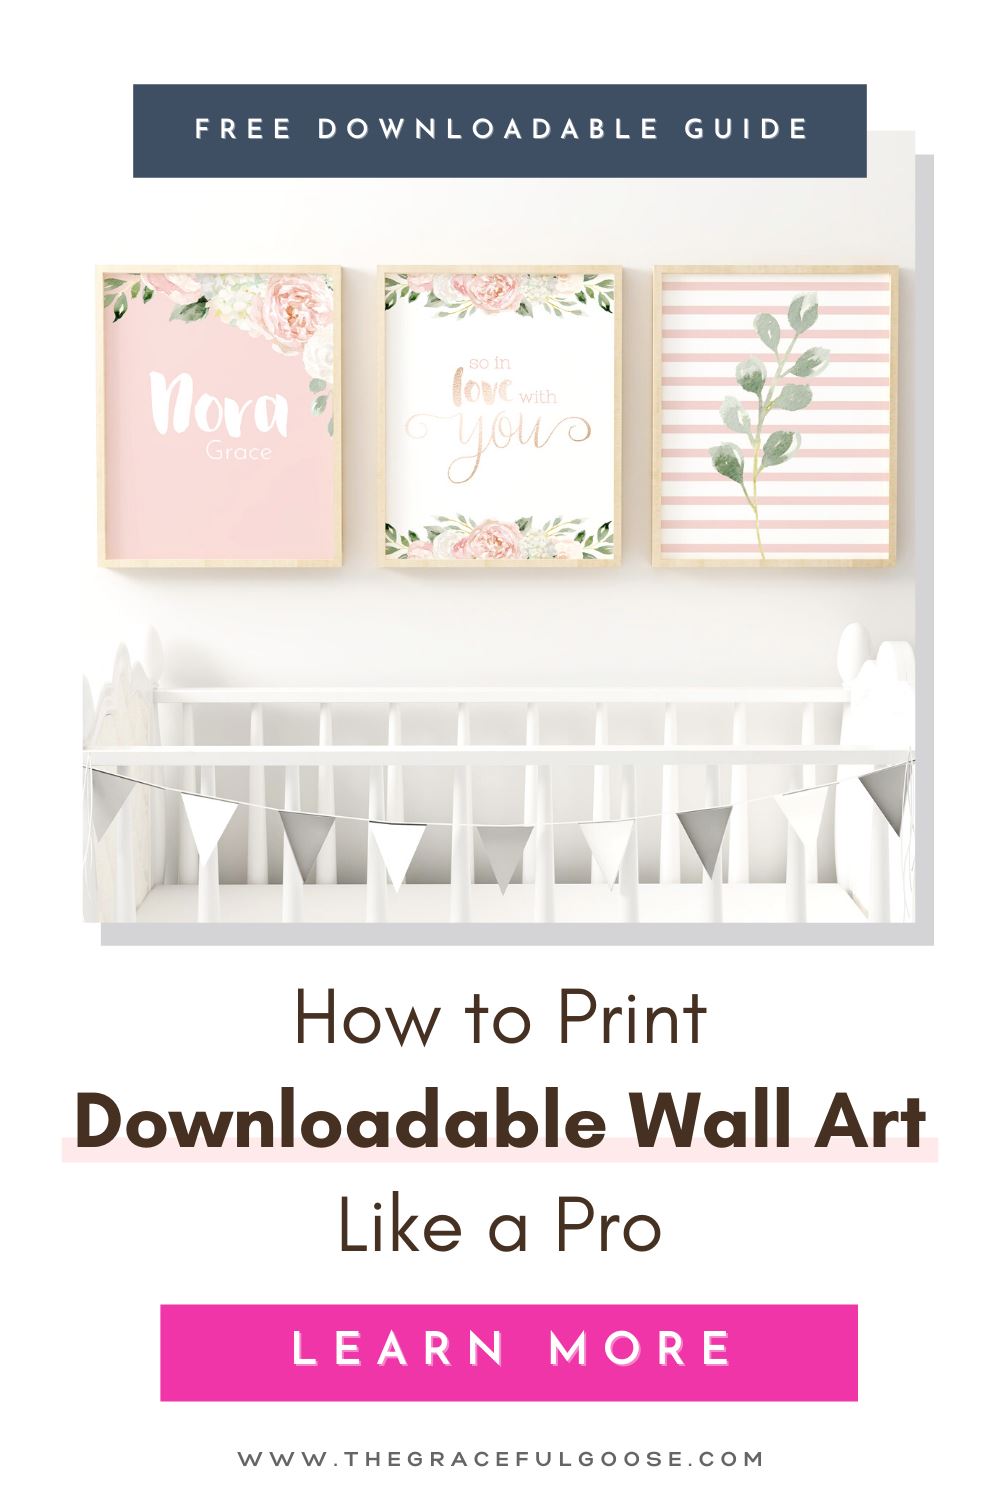 Tips to Help You Print Wall Art Like a Pro (At Home or Online)